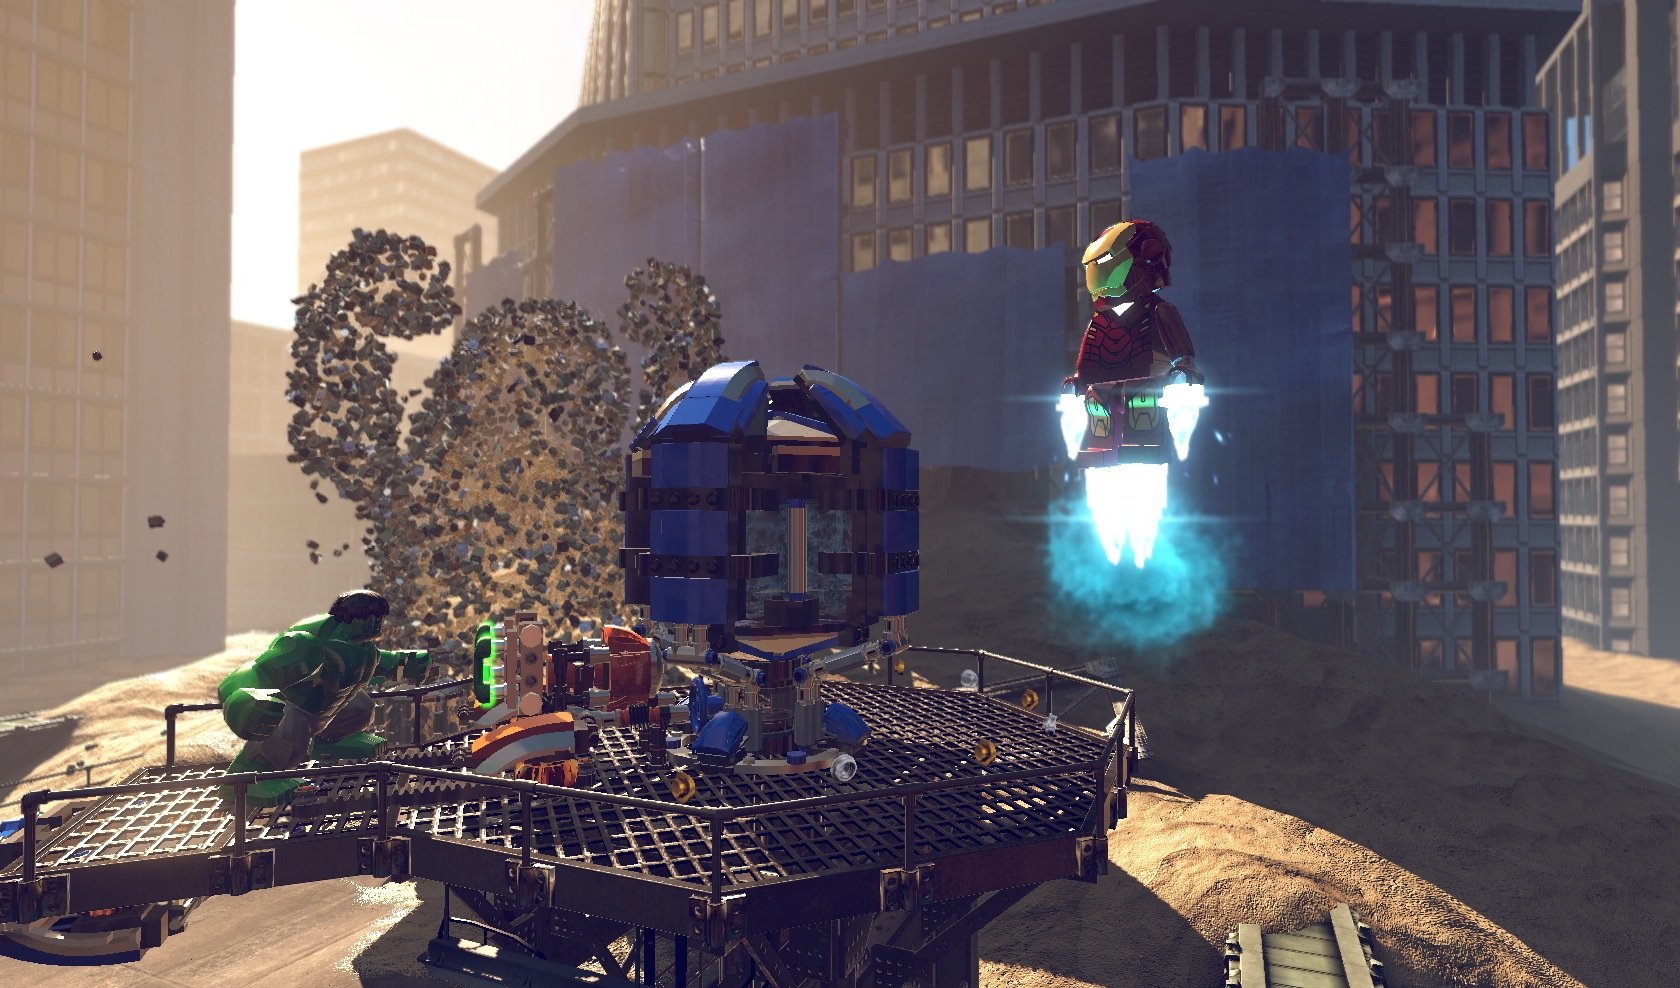 Lego Marvel Super Heroes - review, Games